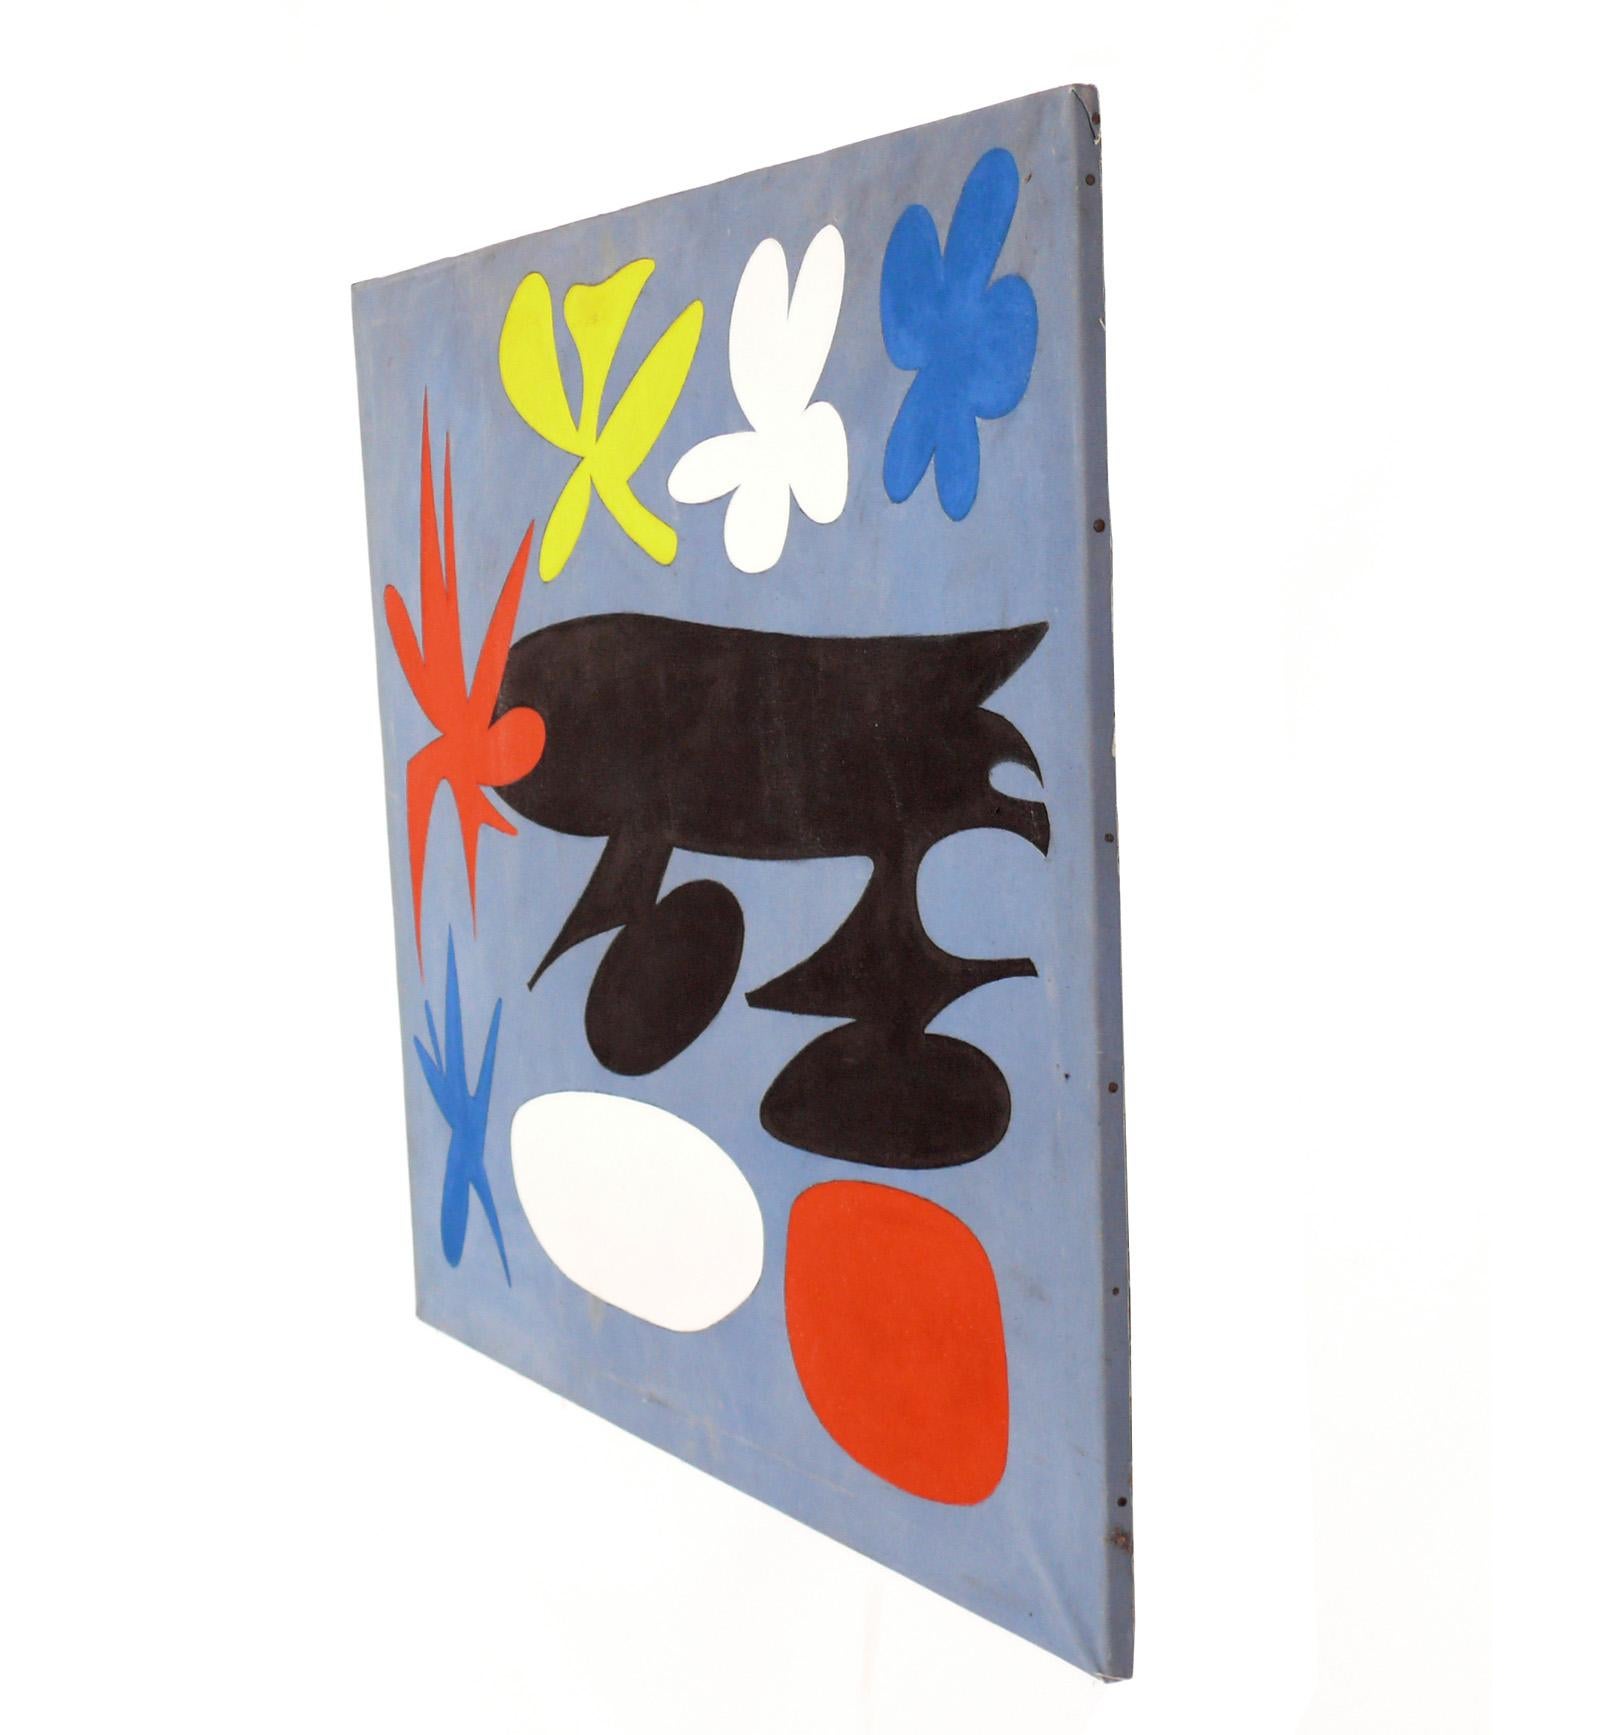 Large Scale Abstract Painting, in the manner of Joan Miro, circa 1960s. It measures an impressive 43